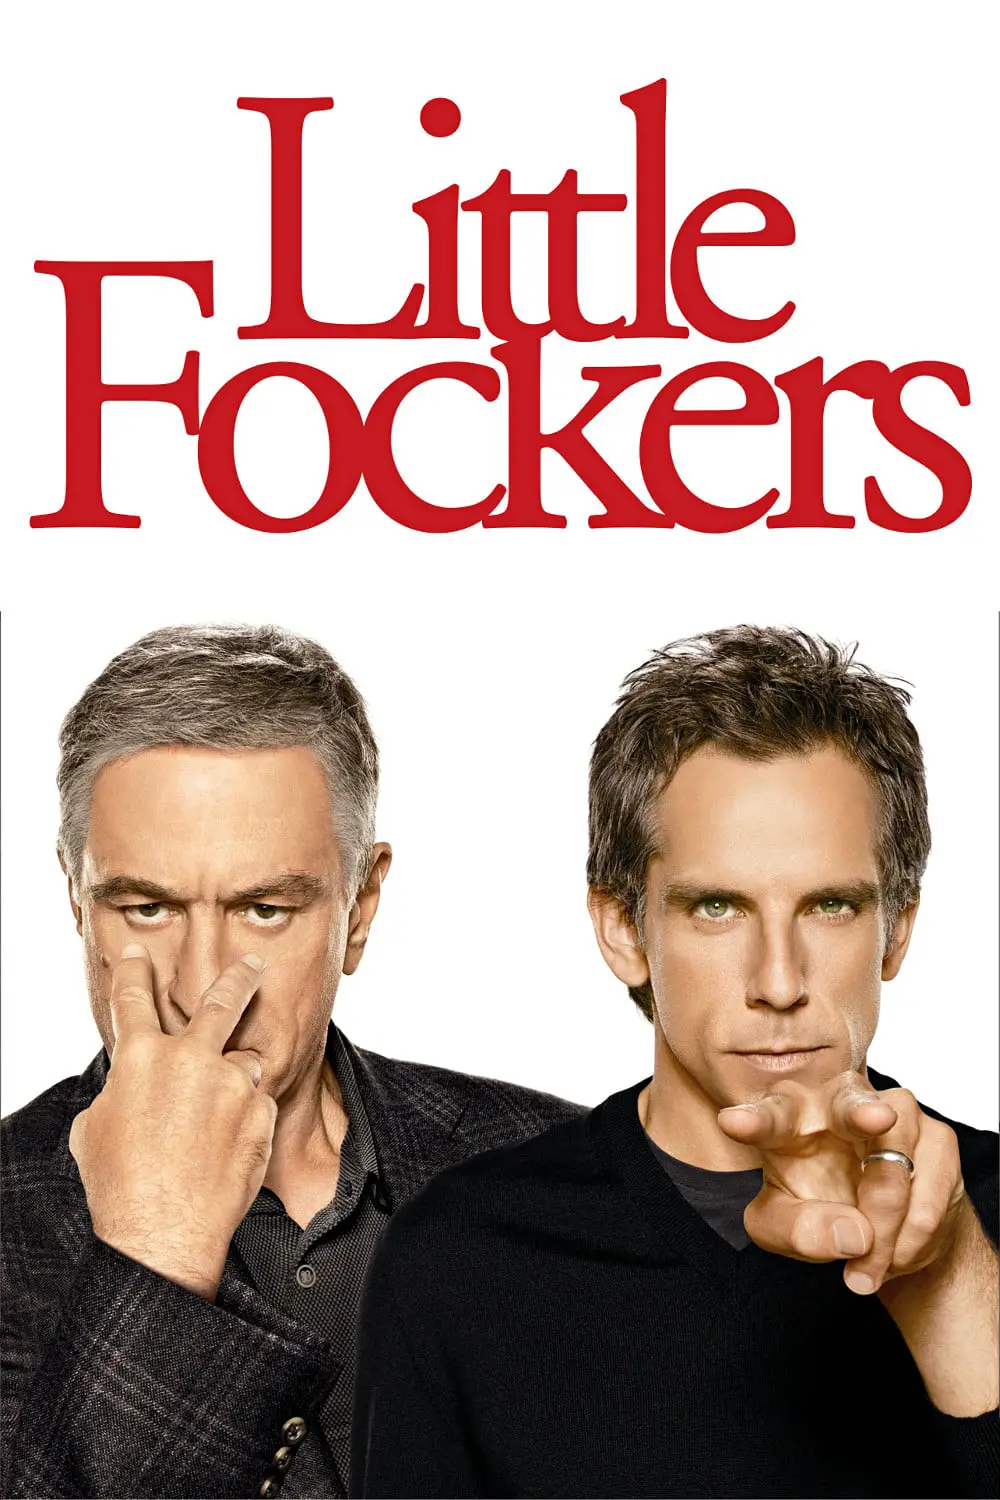 You are currently viewing Little Fockers